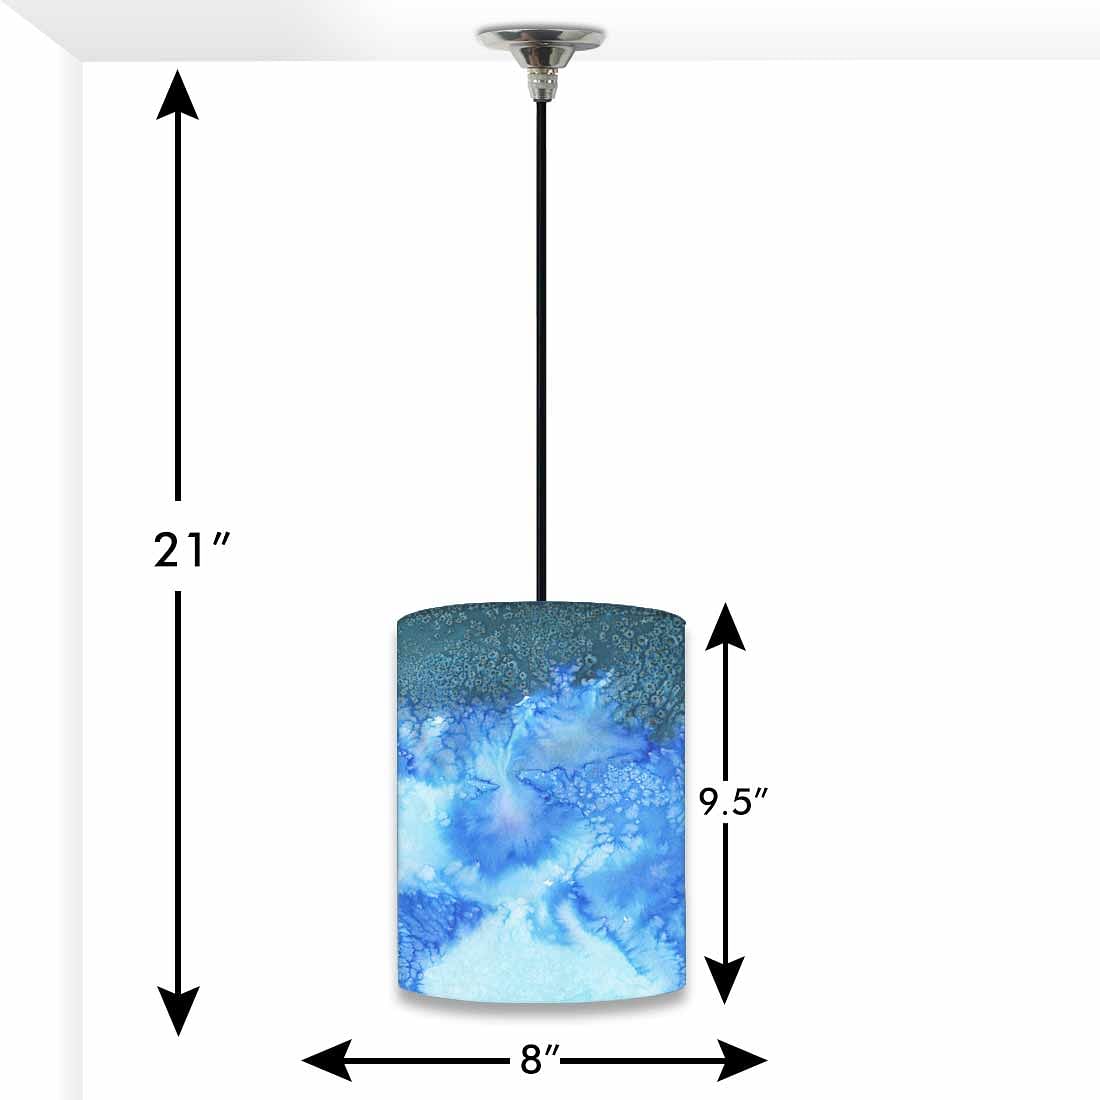 Ceiling Hanging Pendant Lamp Shade - Arctic Space Blue Shades Watercolor Nutcase